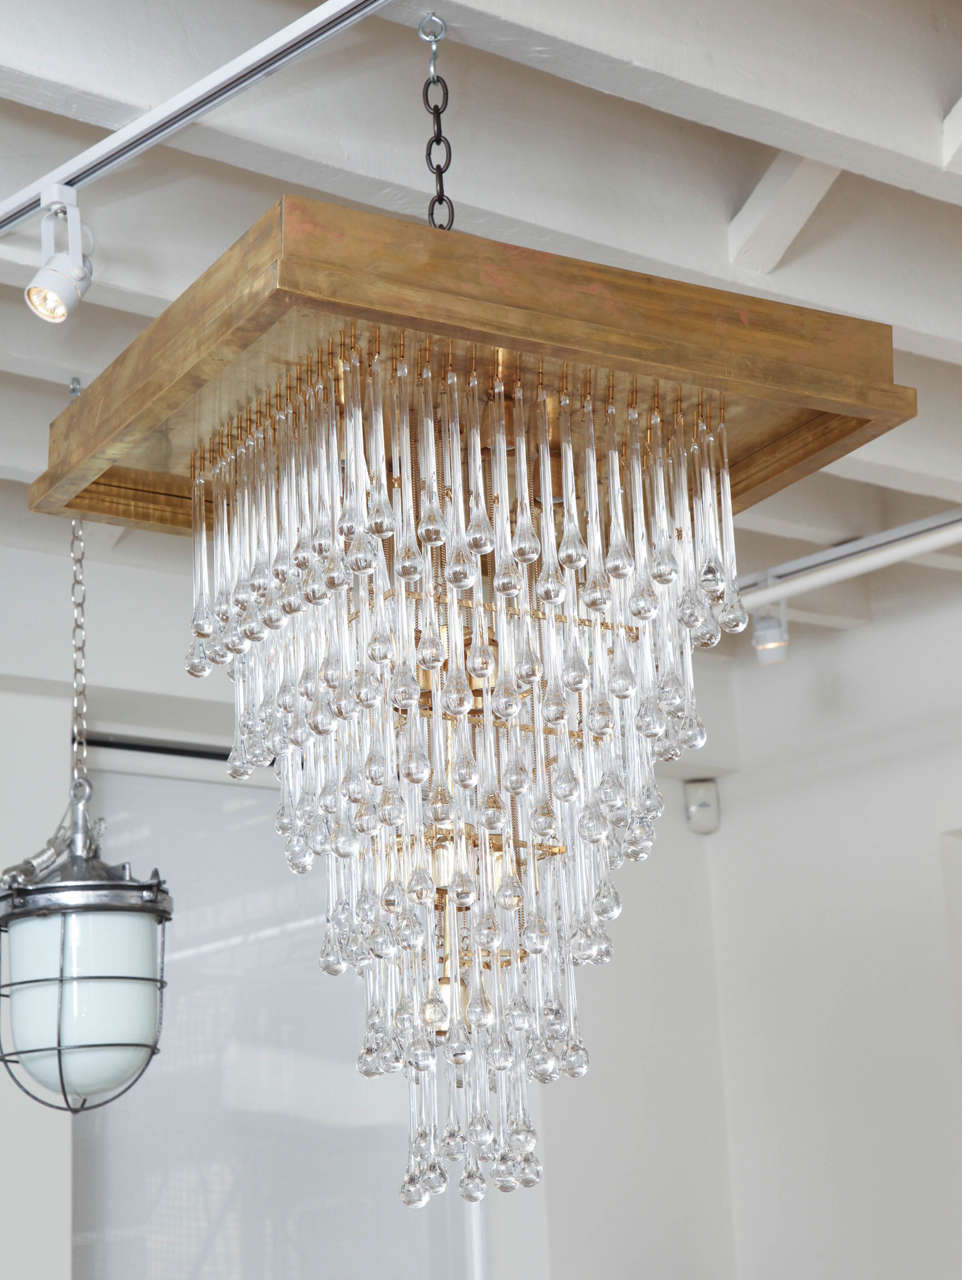 Large tiered tear-drop crystal chandelier with brass mount, from Canary Island Hotel.